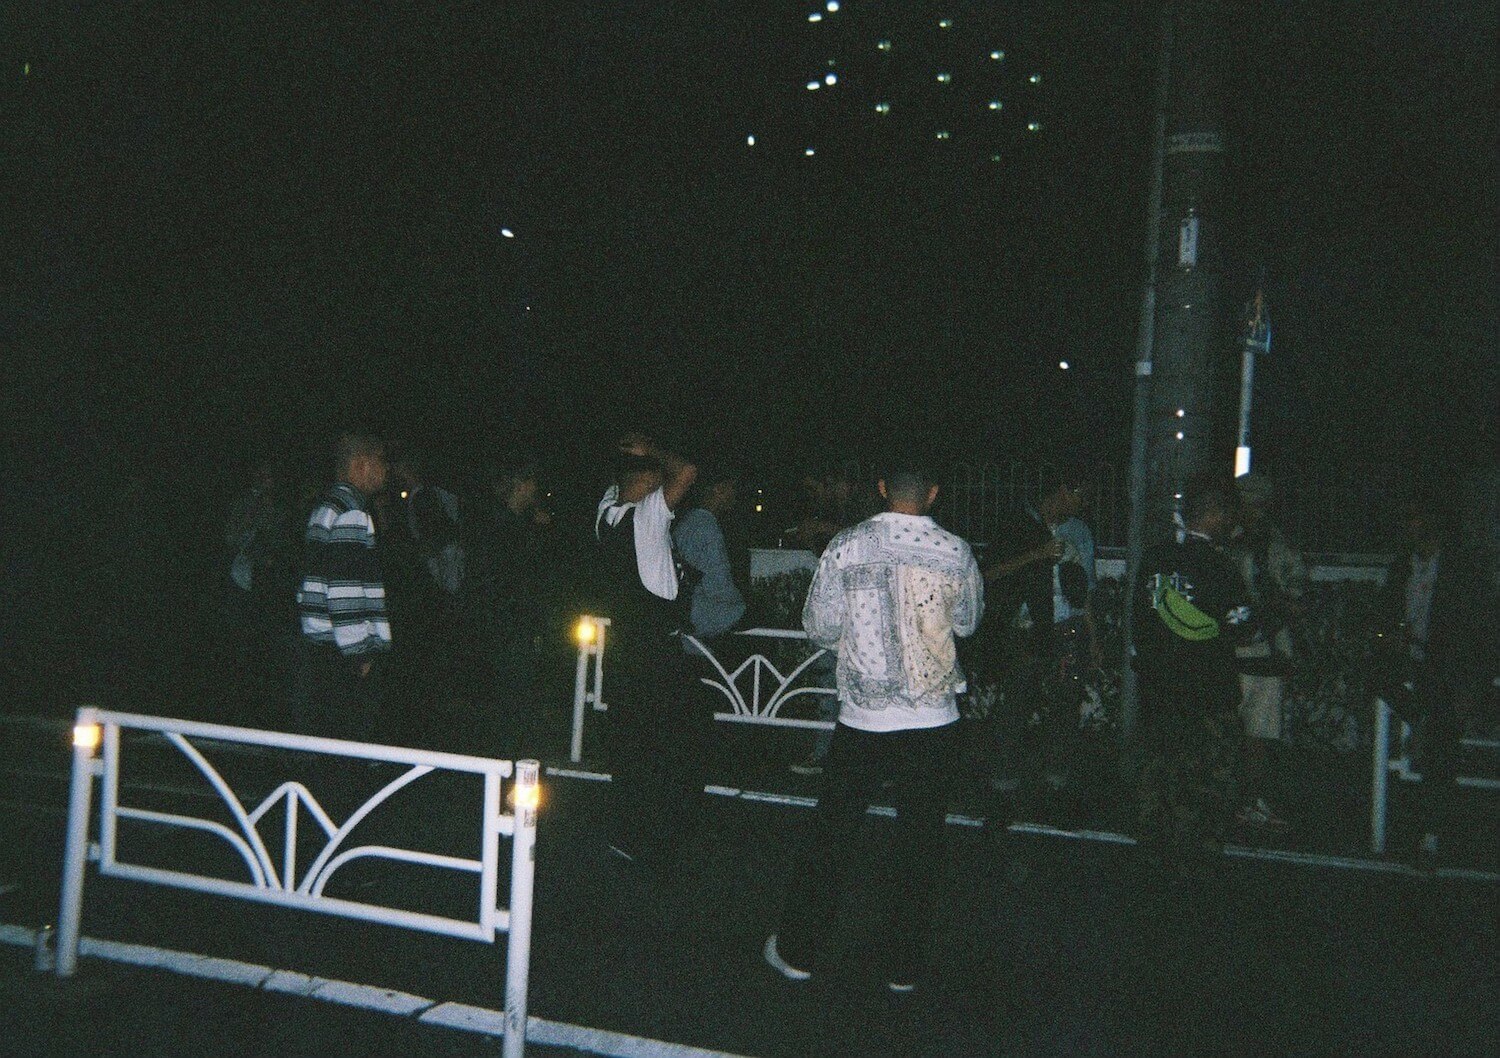 RED BULL MUSIC FESTIVAL TOKYO 2018 PLUG PHOTO BY YENTOWN